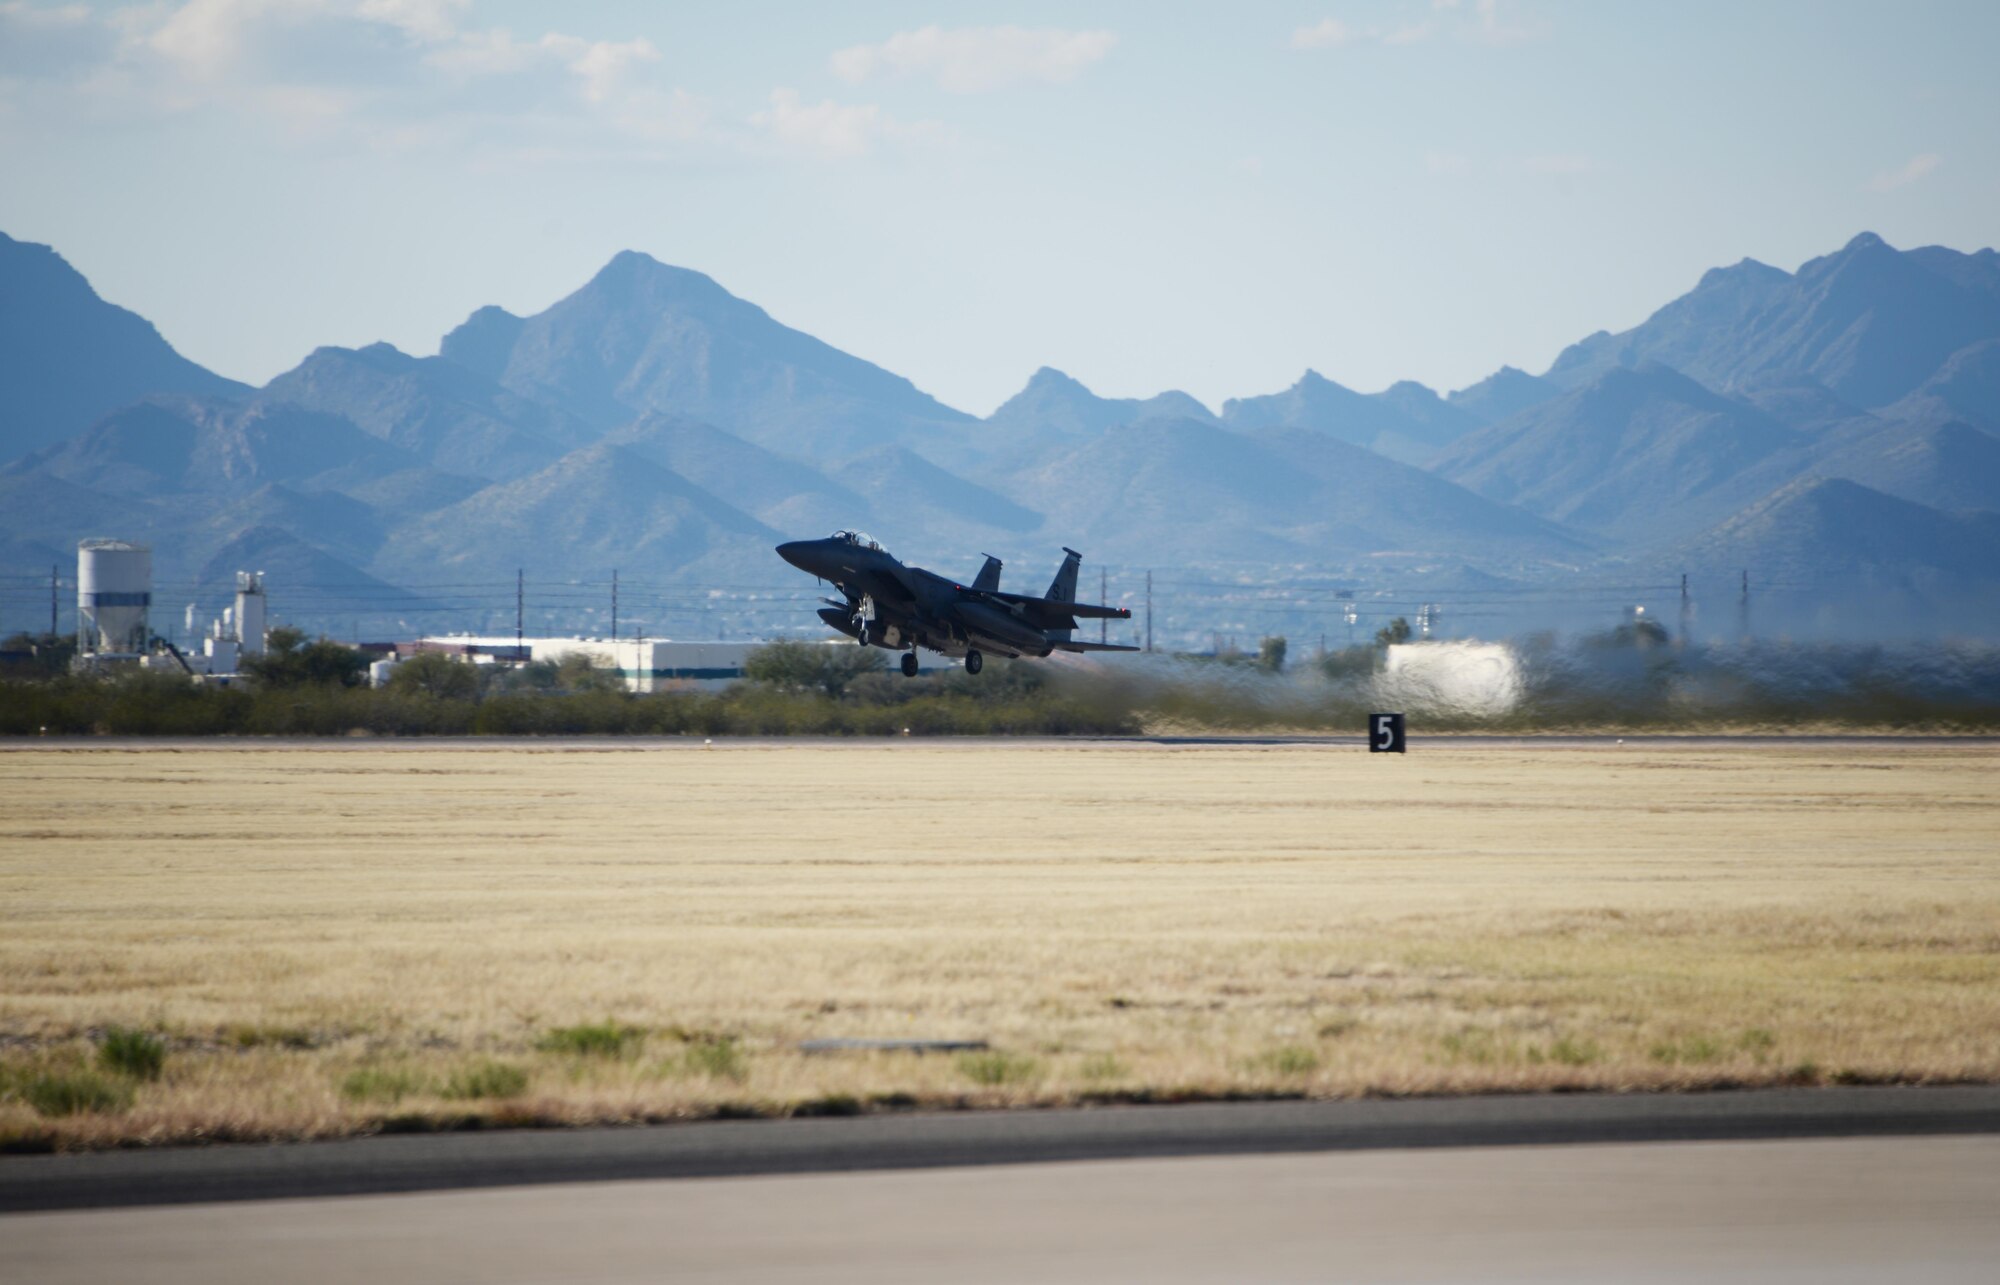 A U.S. Air Force F-15E Strike Eagle from the 334th Fighter Squadron, out of Seymour Johnson Air Force Base, N.C., takes off from Davis-Monthan AFB, Ariz., Jan. 18, 2017. New pilots from the 334th Fighter Squadron participated in a two week training course with the F-15E throughout southern Arizona's military operating areas. (U.S. Air Force photo by Airman 1st Class Giovanni Sims)